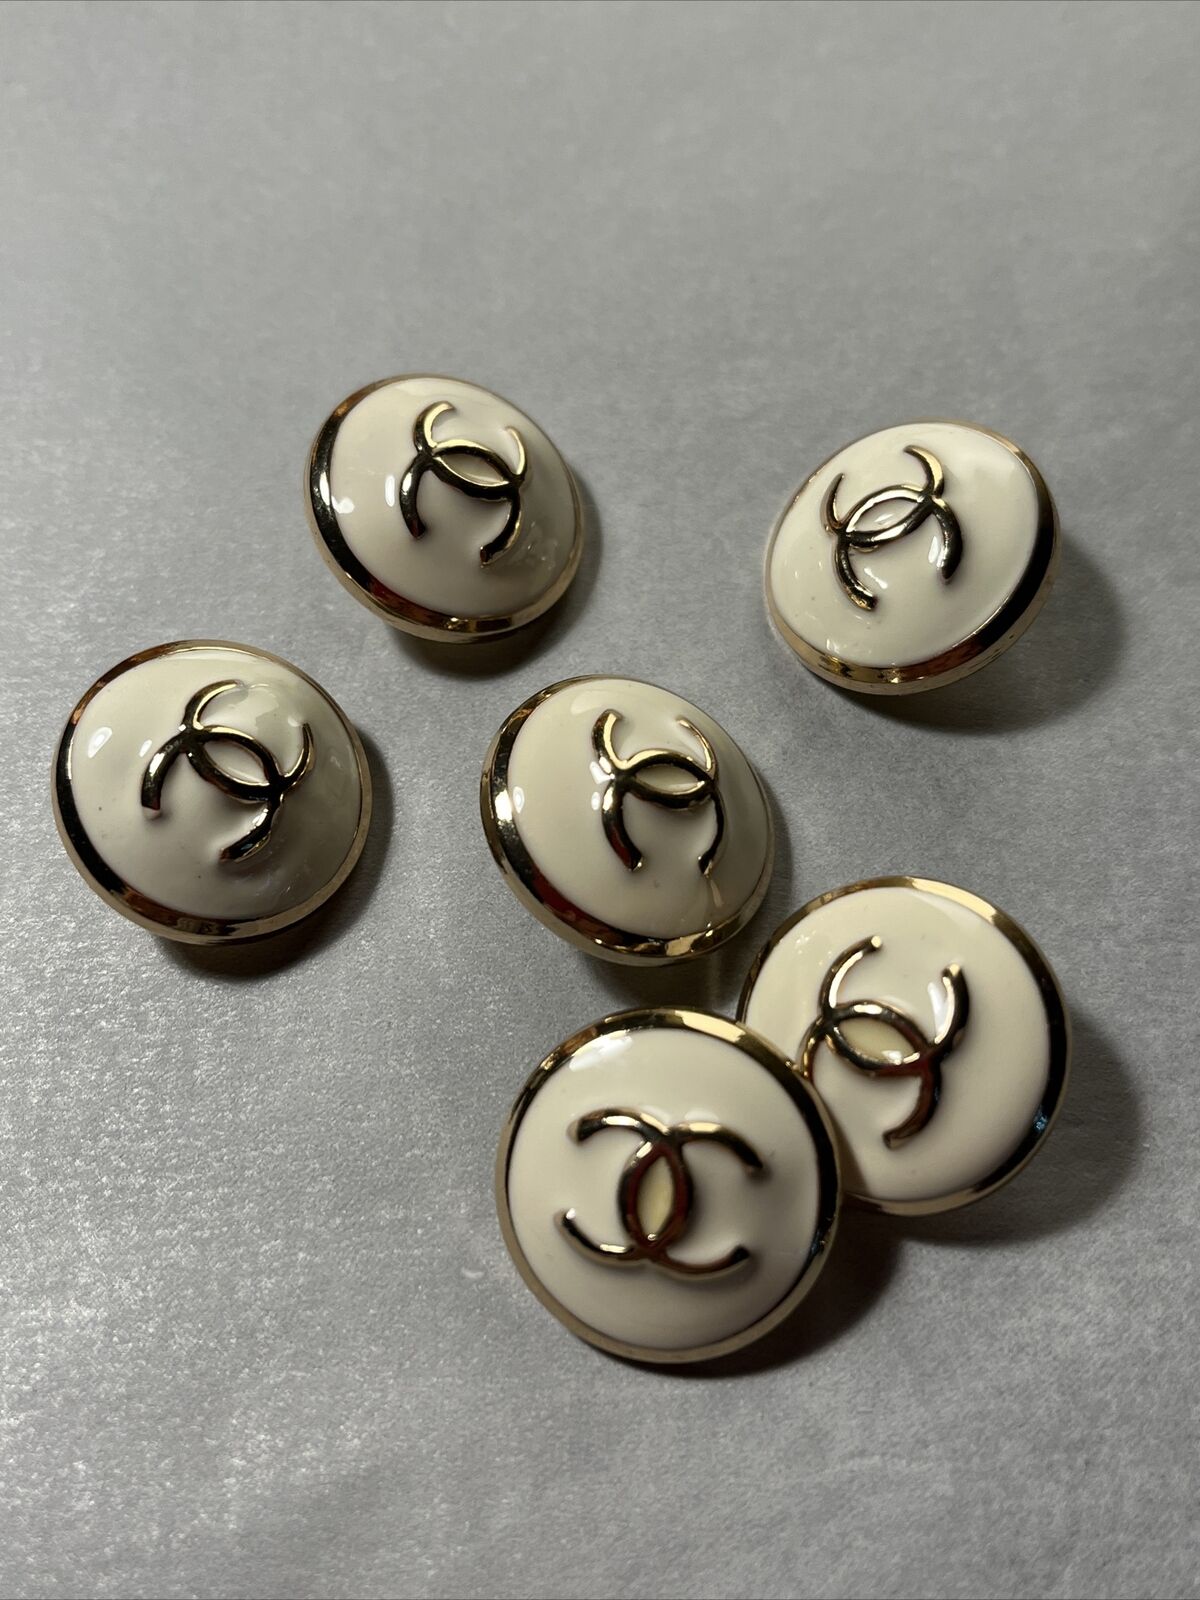 6 Round White And Golden Color Metal Chanel Buttons, 20 Mm